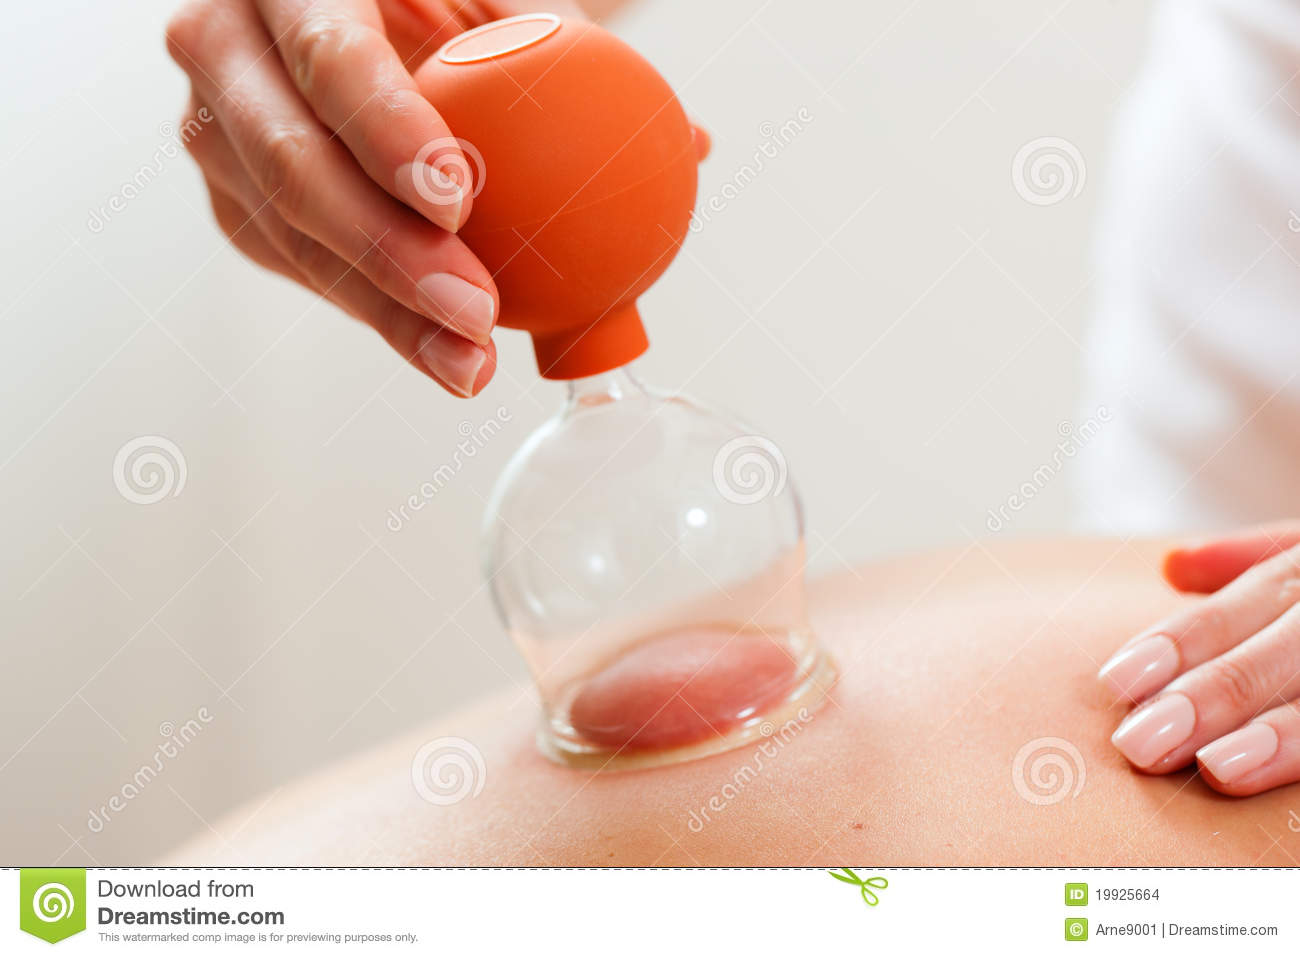 Patient At The Physiotherapy   Cupping Stock Images   Image  19925664